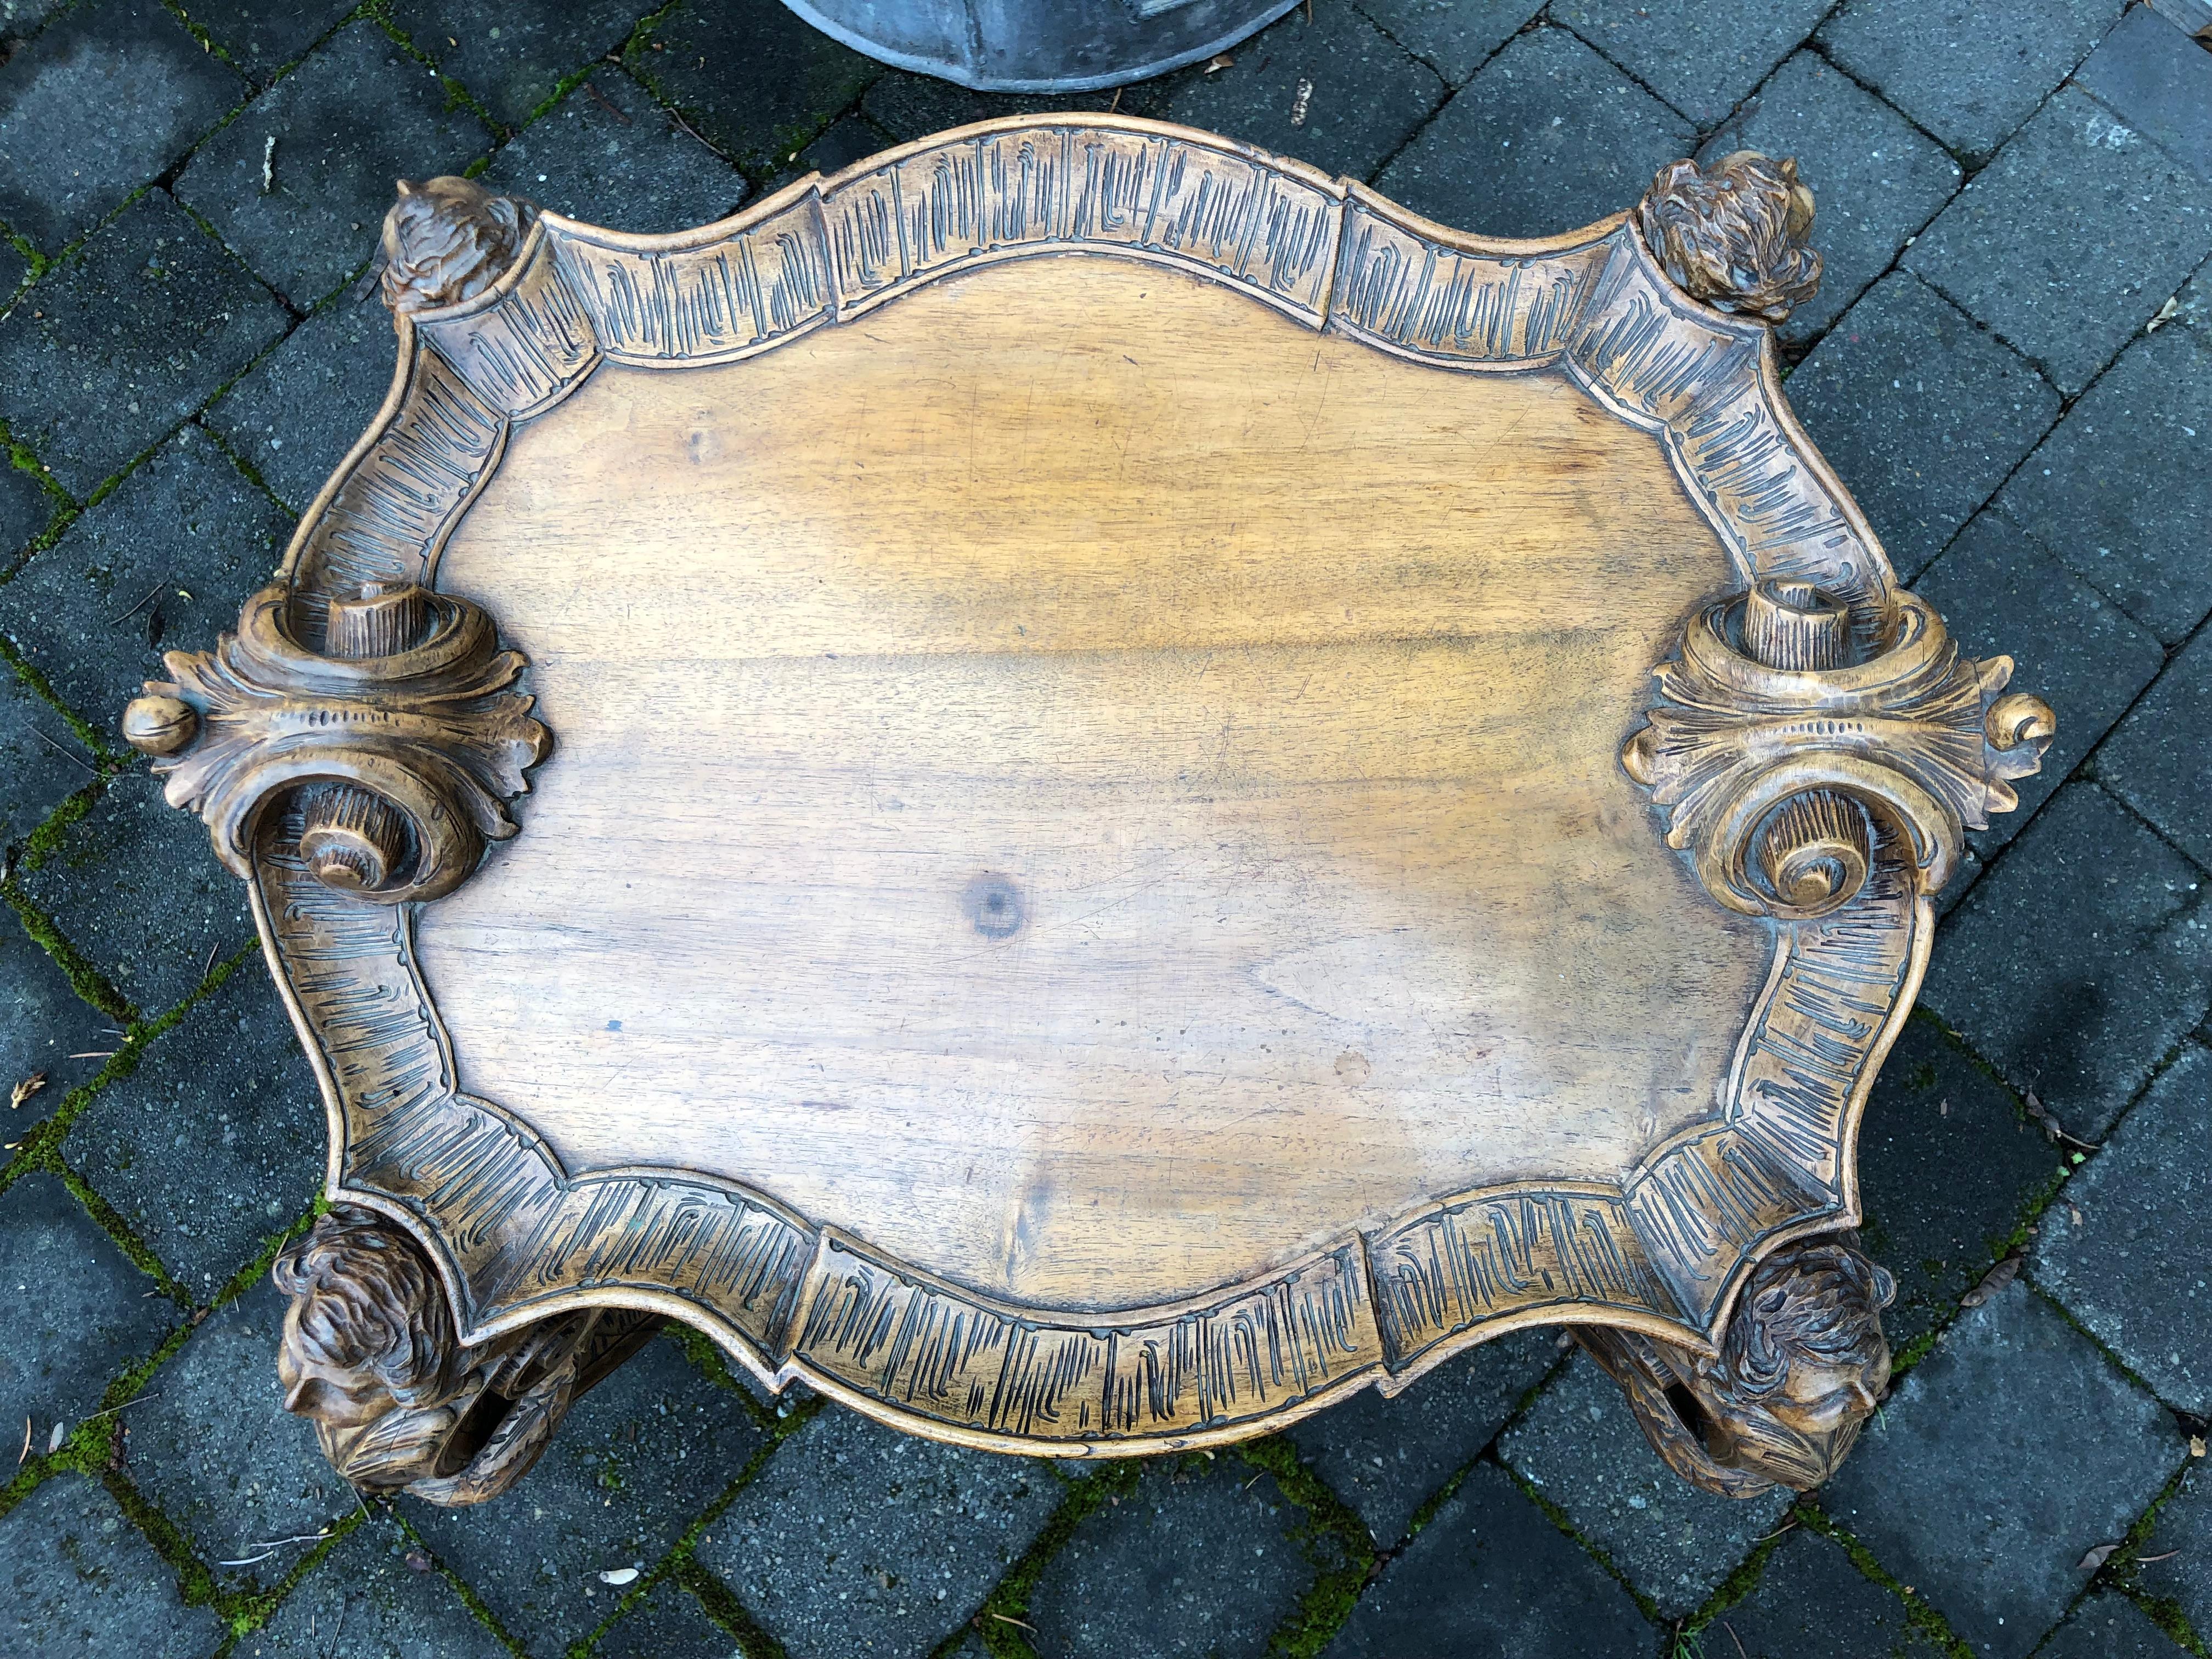 Carved Italian Wood Tray Table with Cherrubs, Scrolls, Removable Top In Good Condition For Sale In Seattle, WA